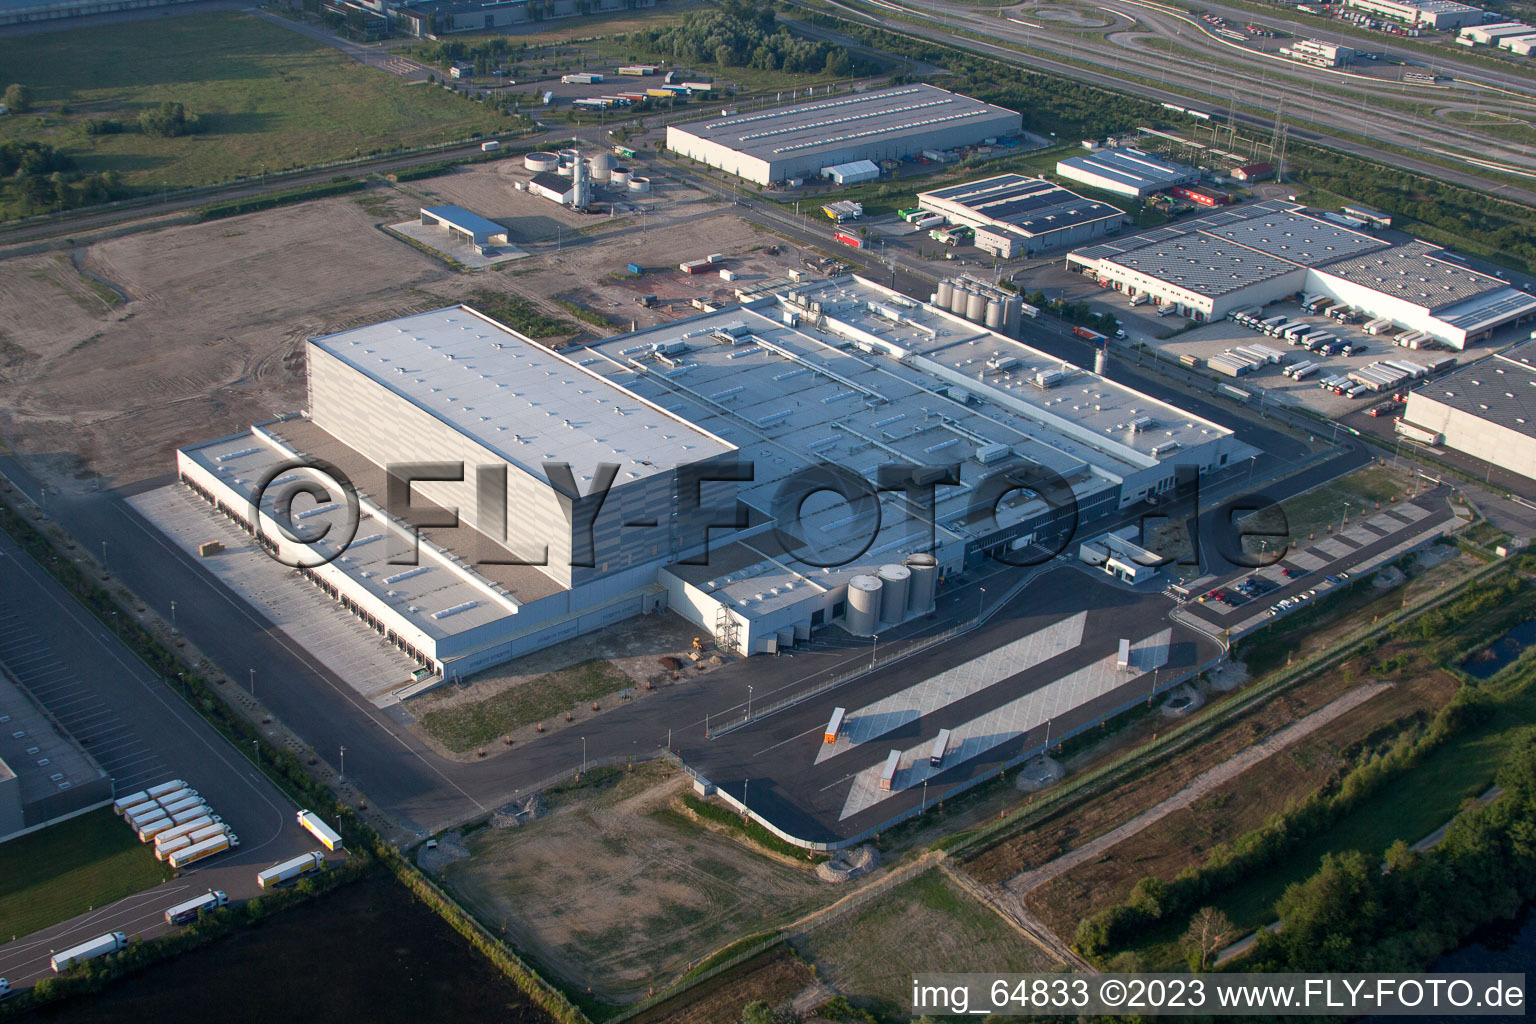 Drone image of Oberwald industrial area in Wörth am Rhein in the state Rhineland-Palatinate, Germany